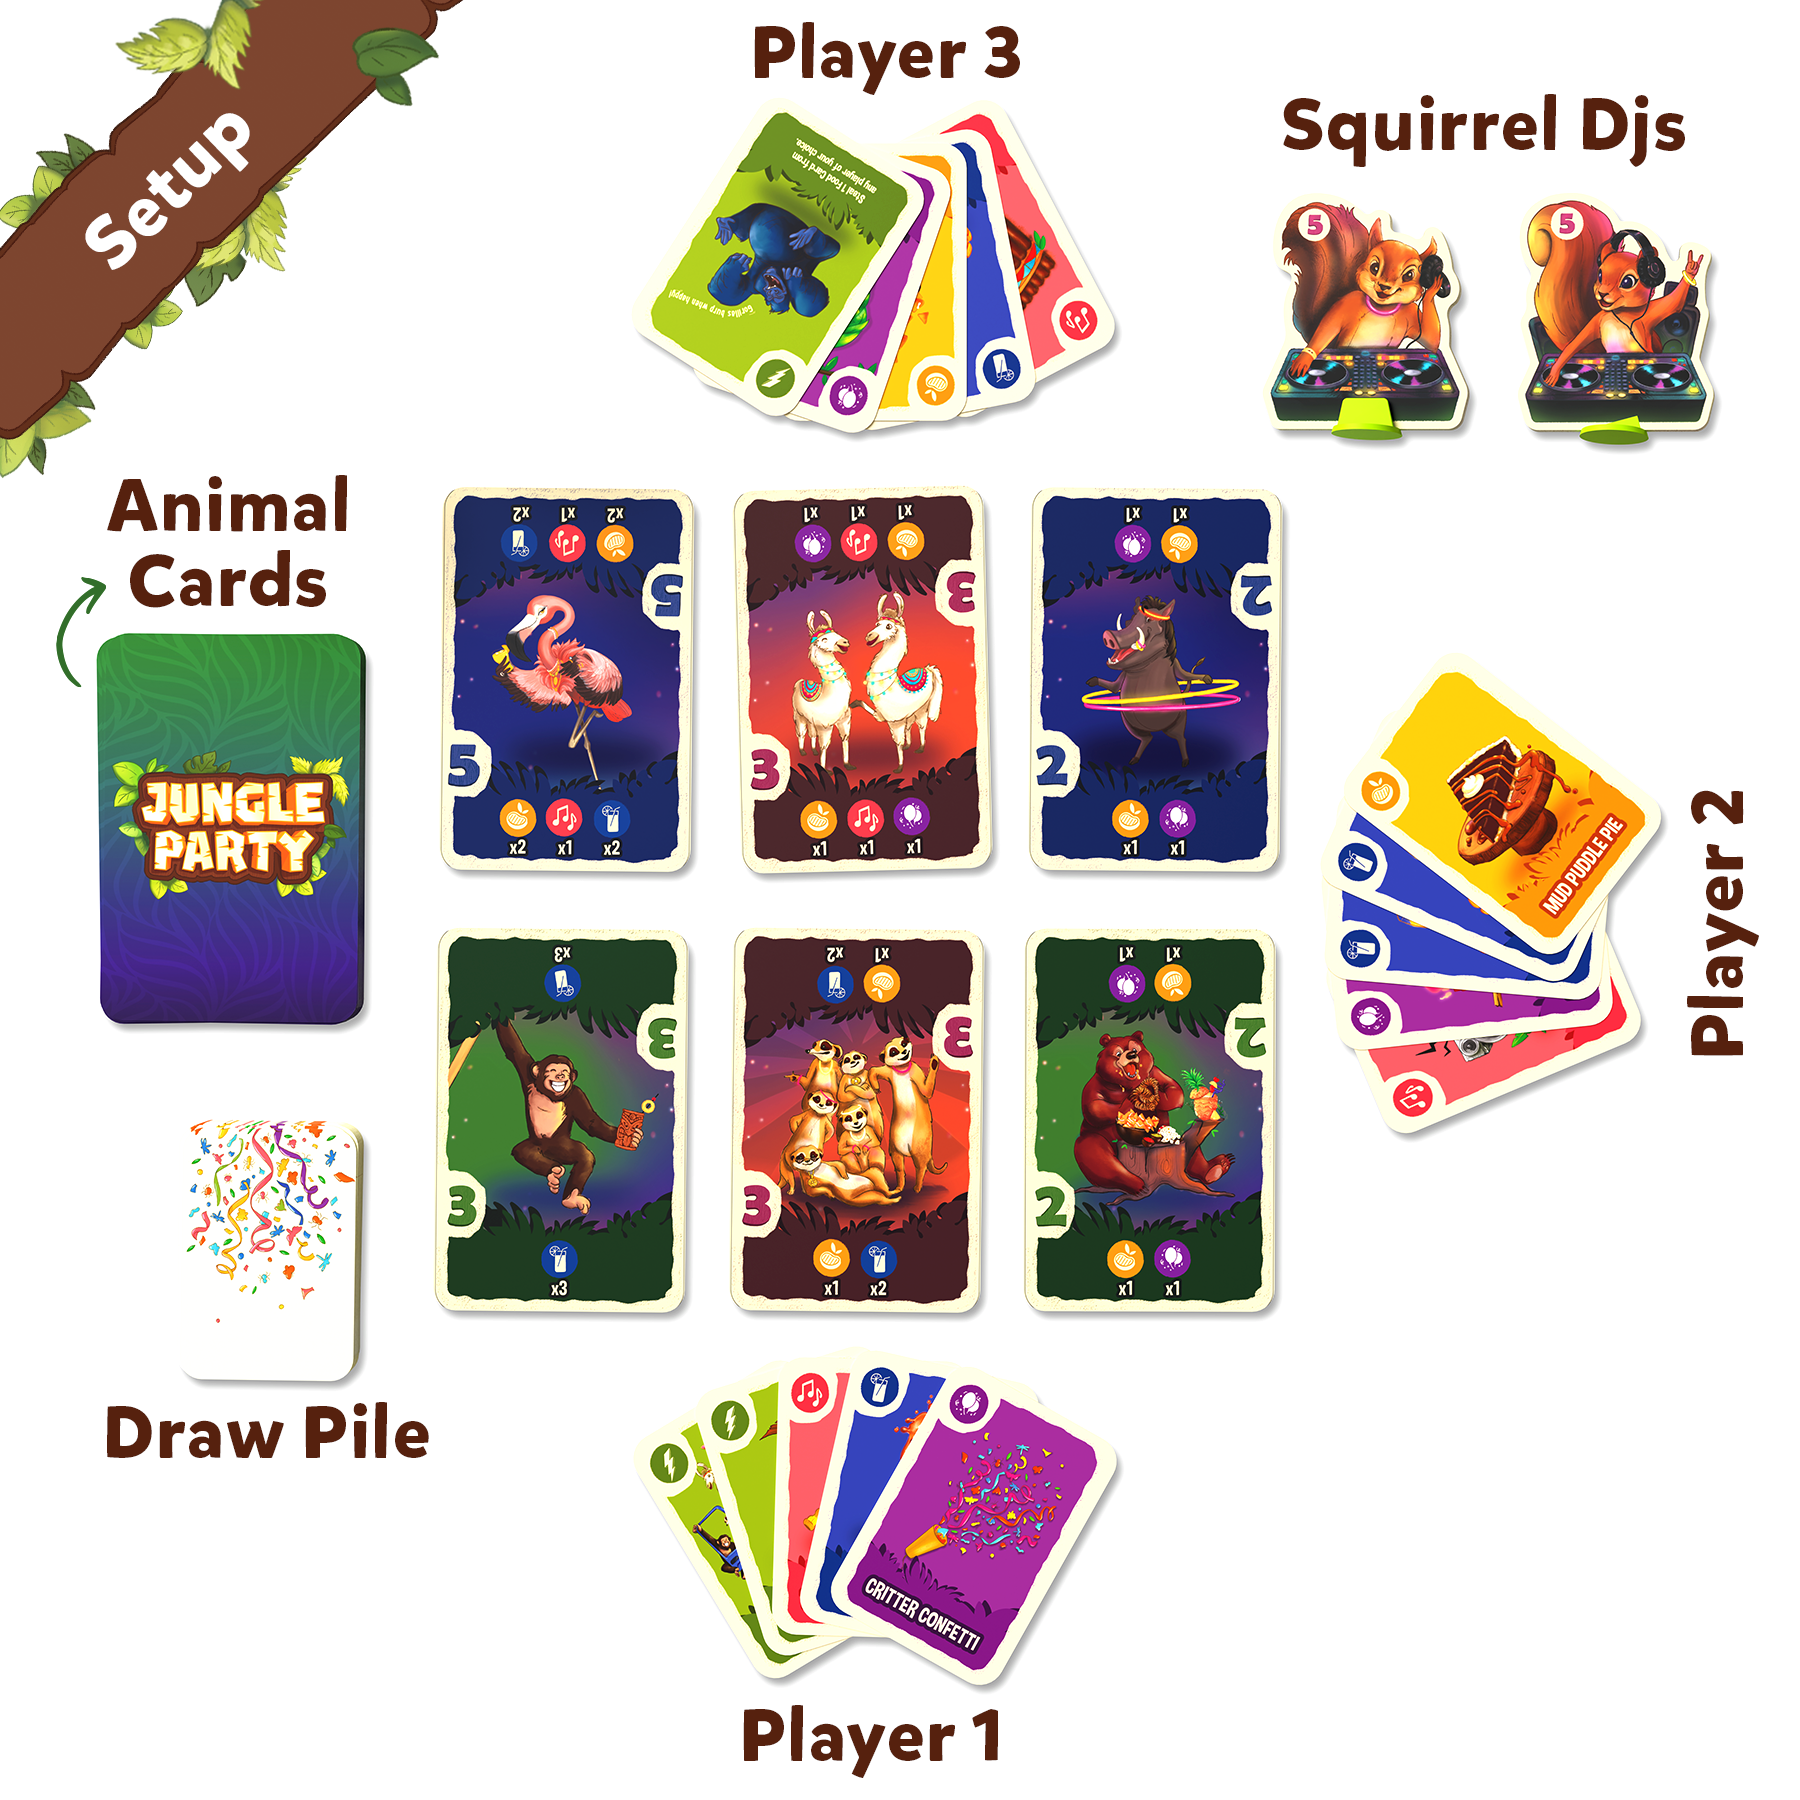 Skillmatics Card Game - Jungle Party, Fun Family Card Game of Strategy & Luck, Party Game, Gifts for Girls & Boys Ages 7, 8, 9 & Up